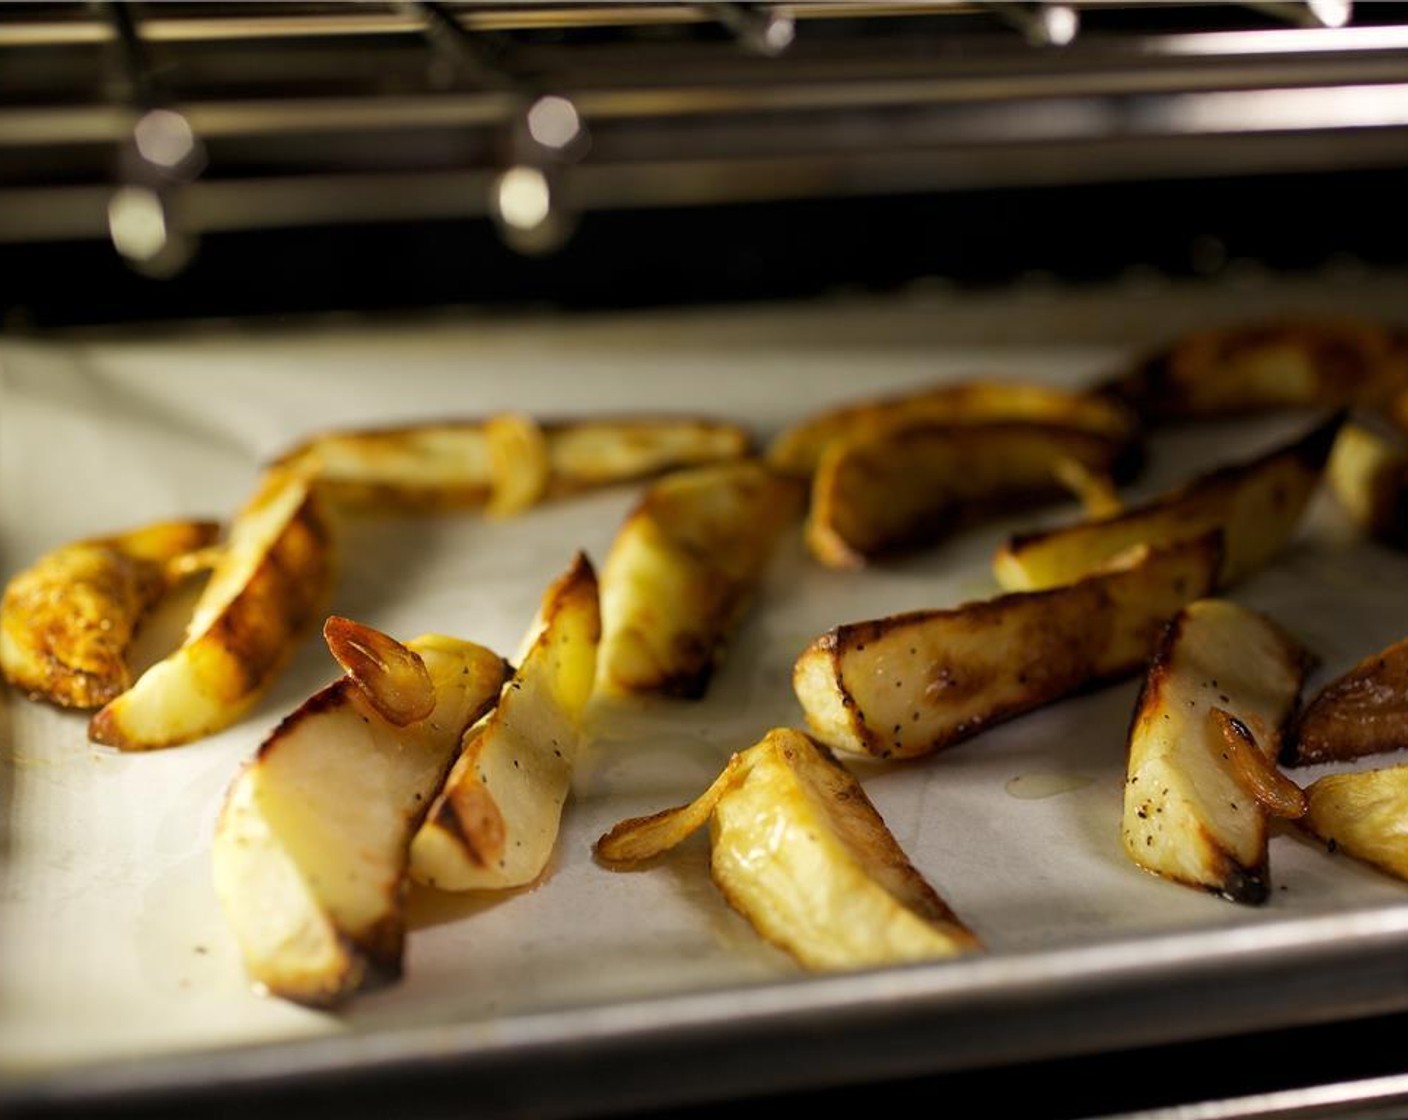 step 5 Place potatoes in a single layer on a sheet pan. Bake for 30 minutes. Remove from oven and toss with Fresh Parsley (3 Tbsp).